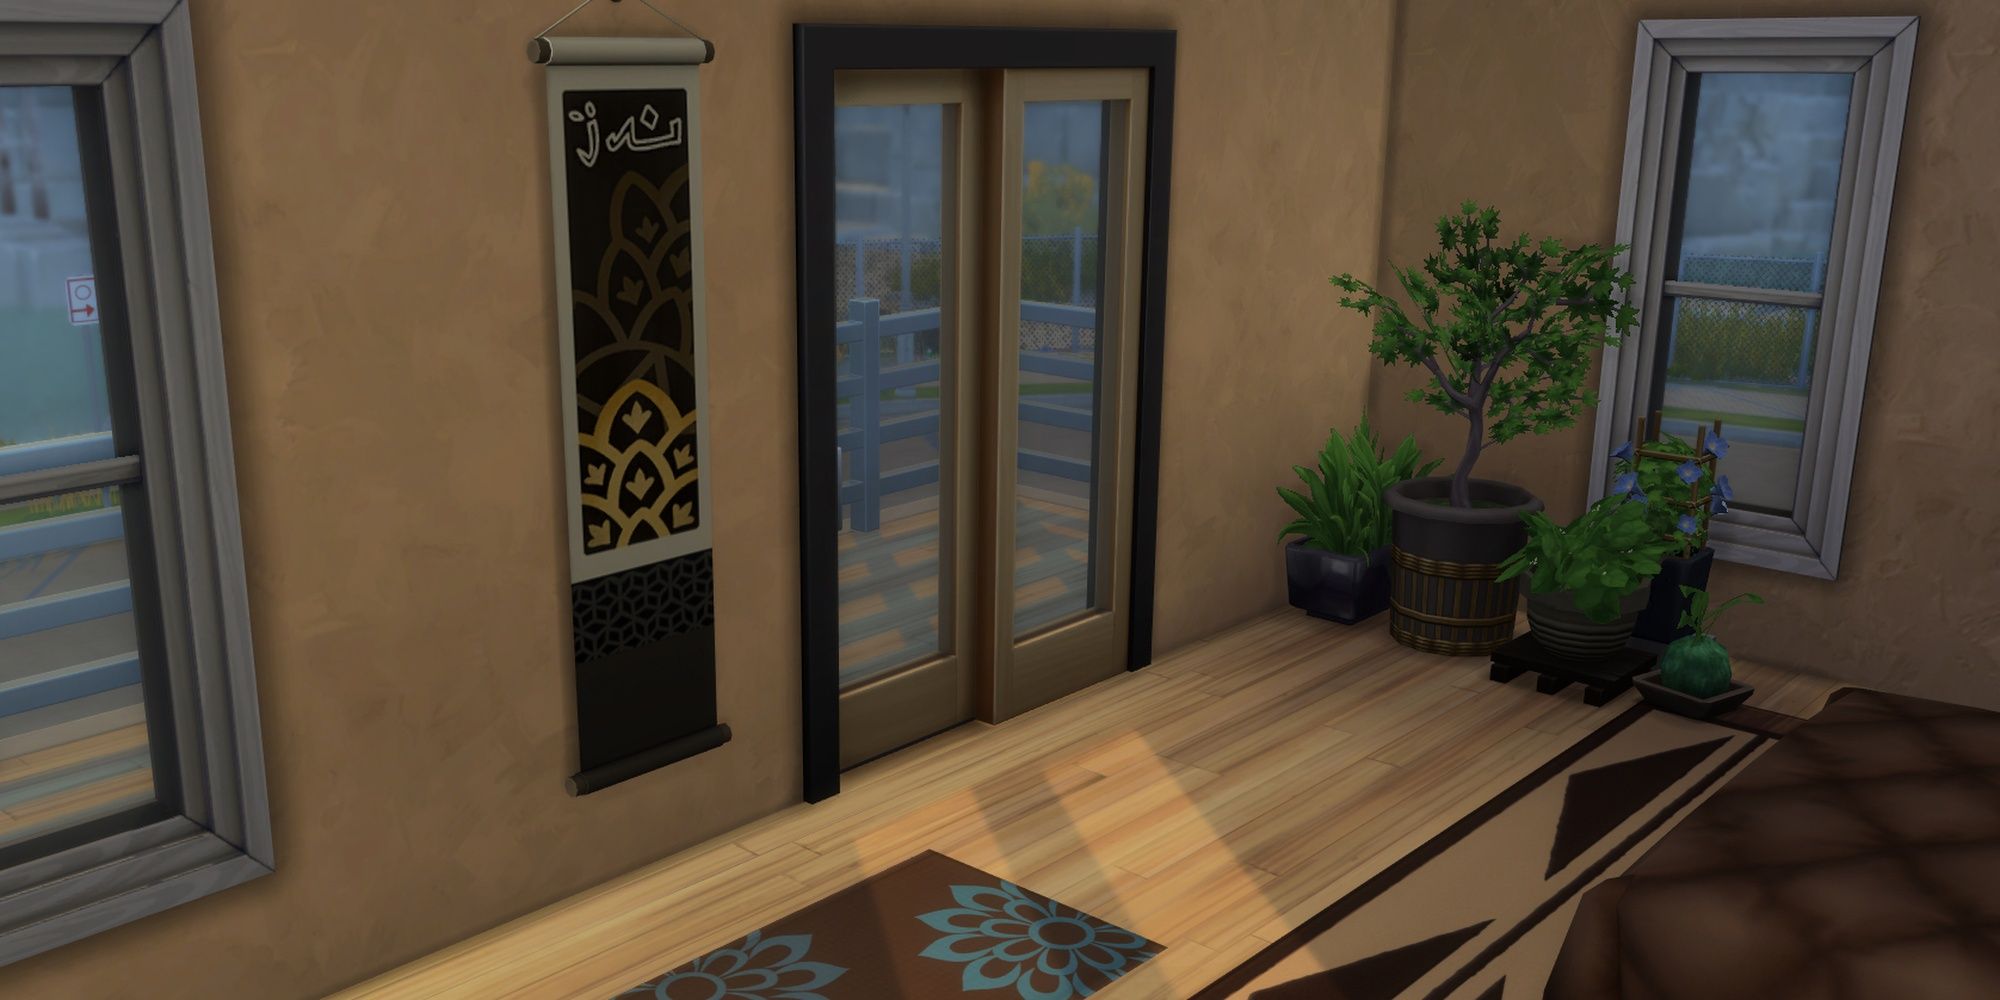 A brown and gold lotus wall banner on a bedroom wall in The Sims 4.